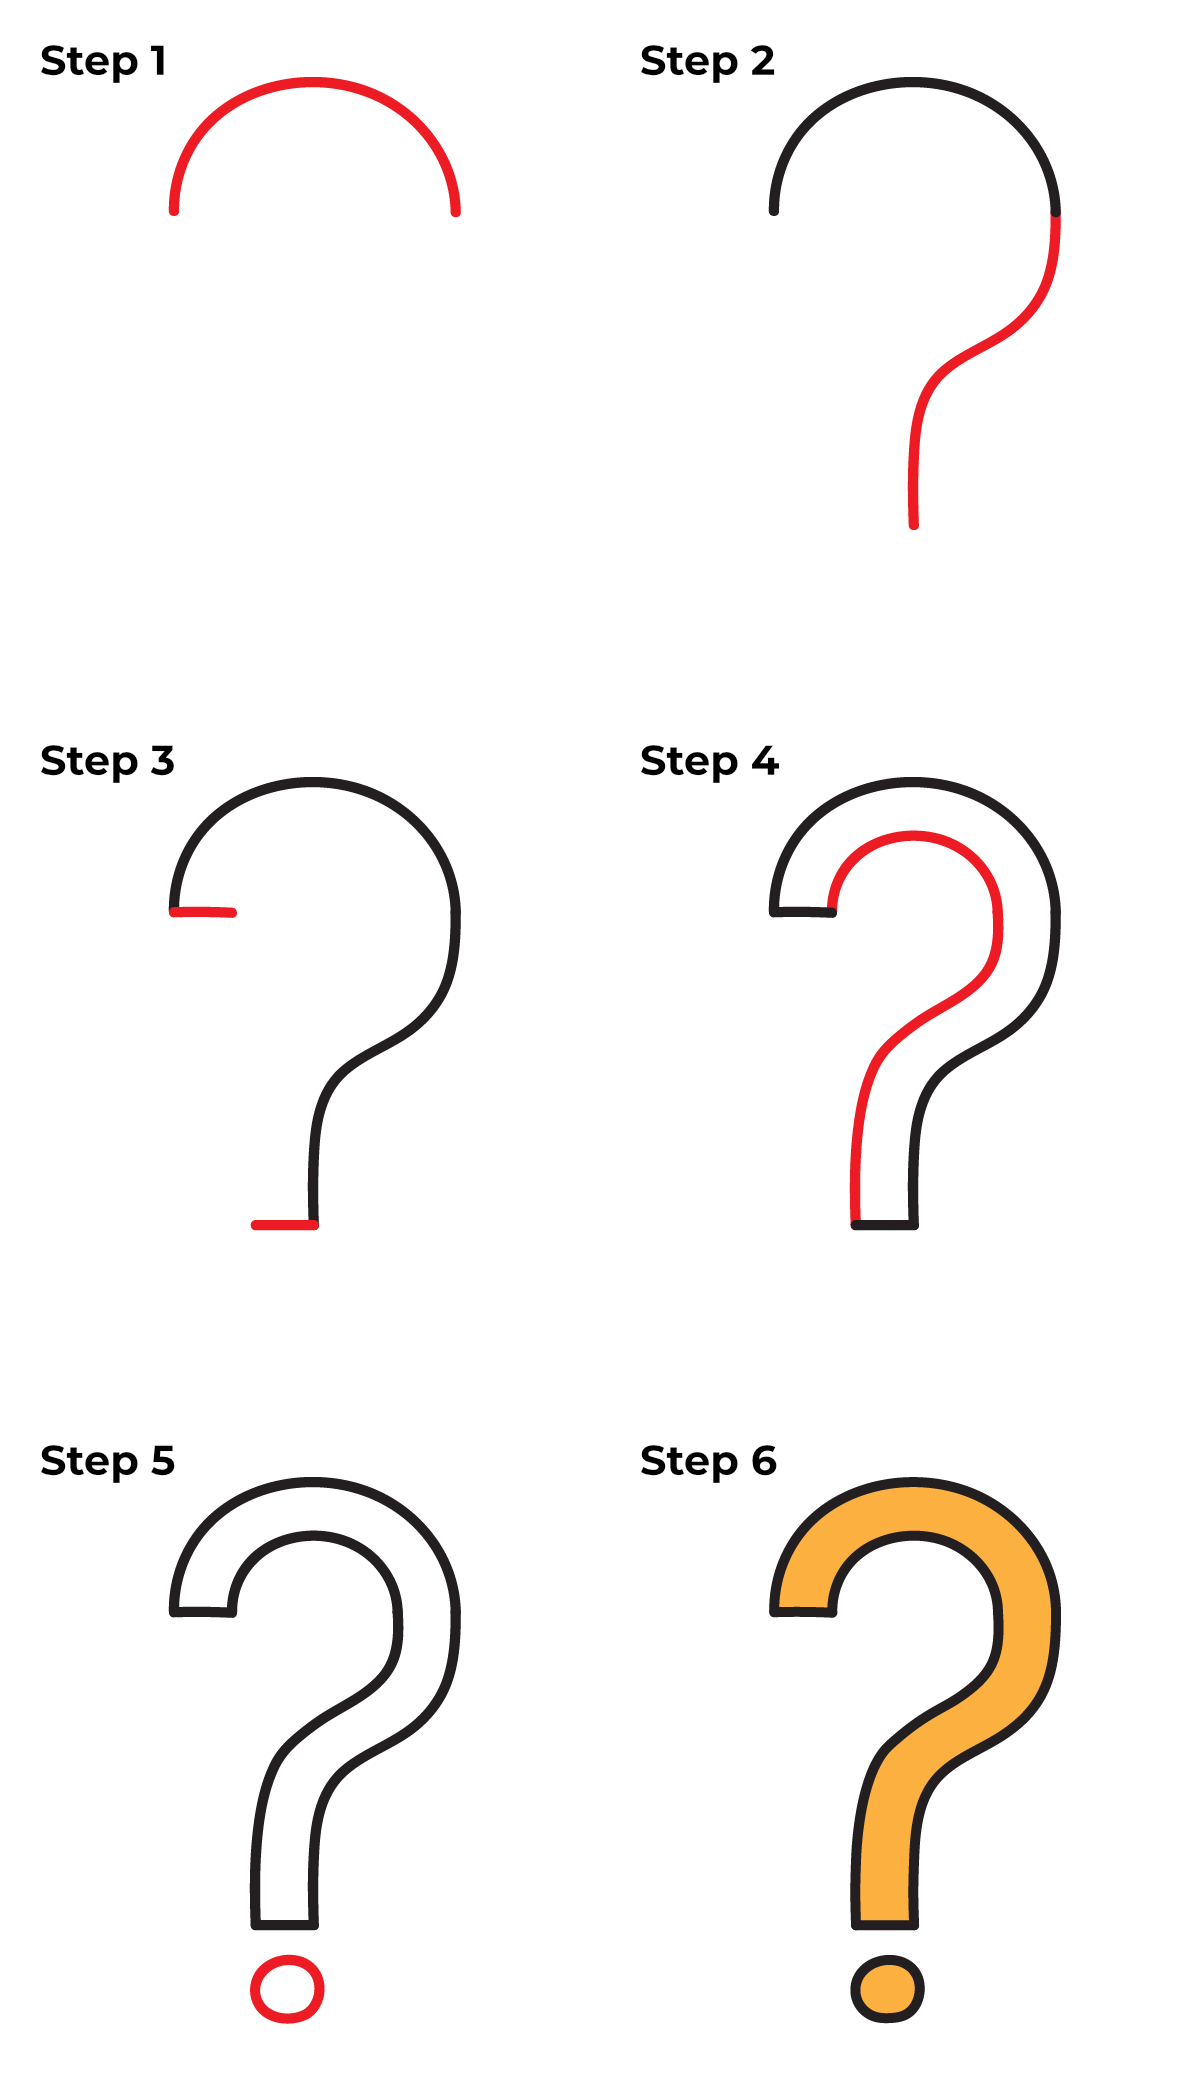 How to Draw a Question Mark